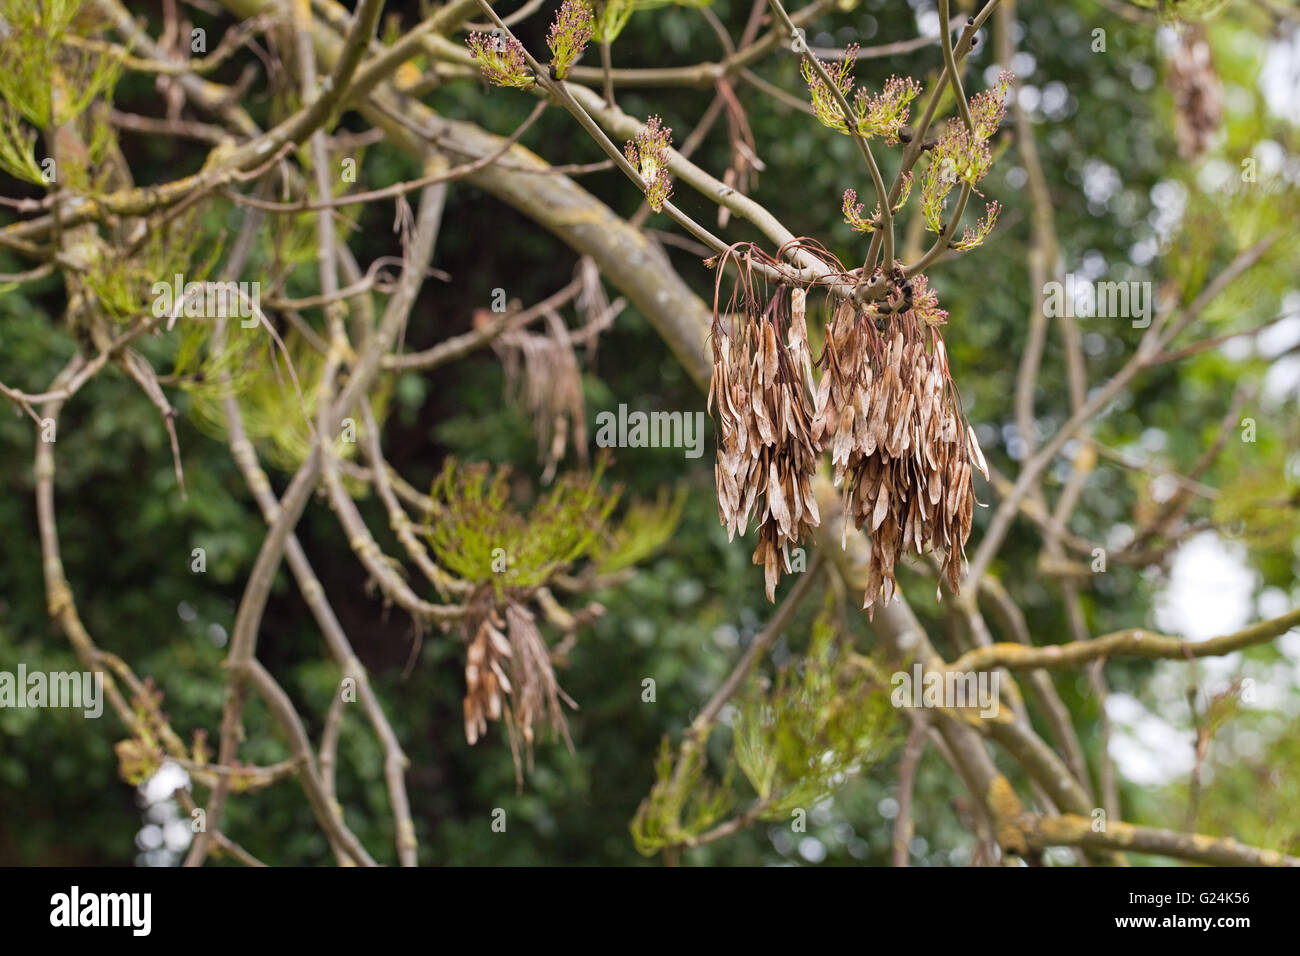 Common Ash Tree (Fraxinus excelsior). Fruits containing seeds or Keys, hanging from a branch produced in the previous year. Stock Photo